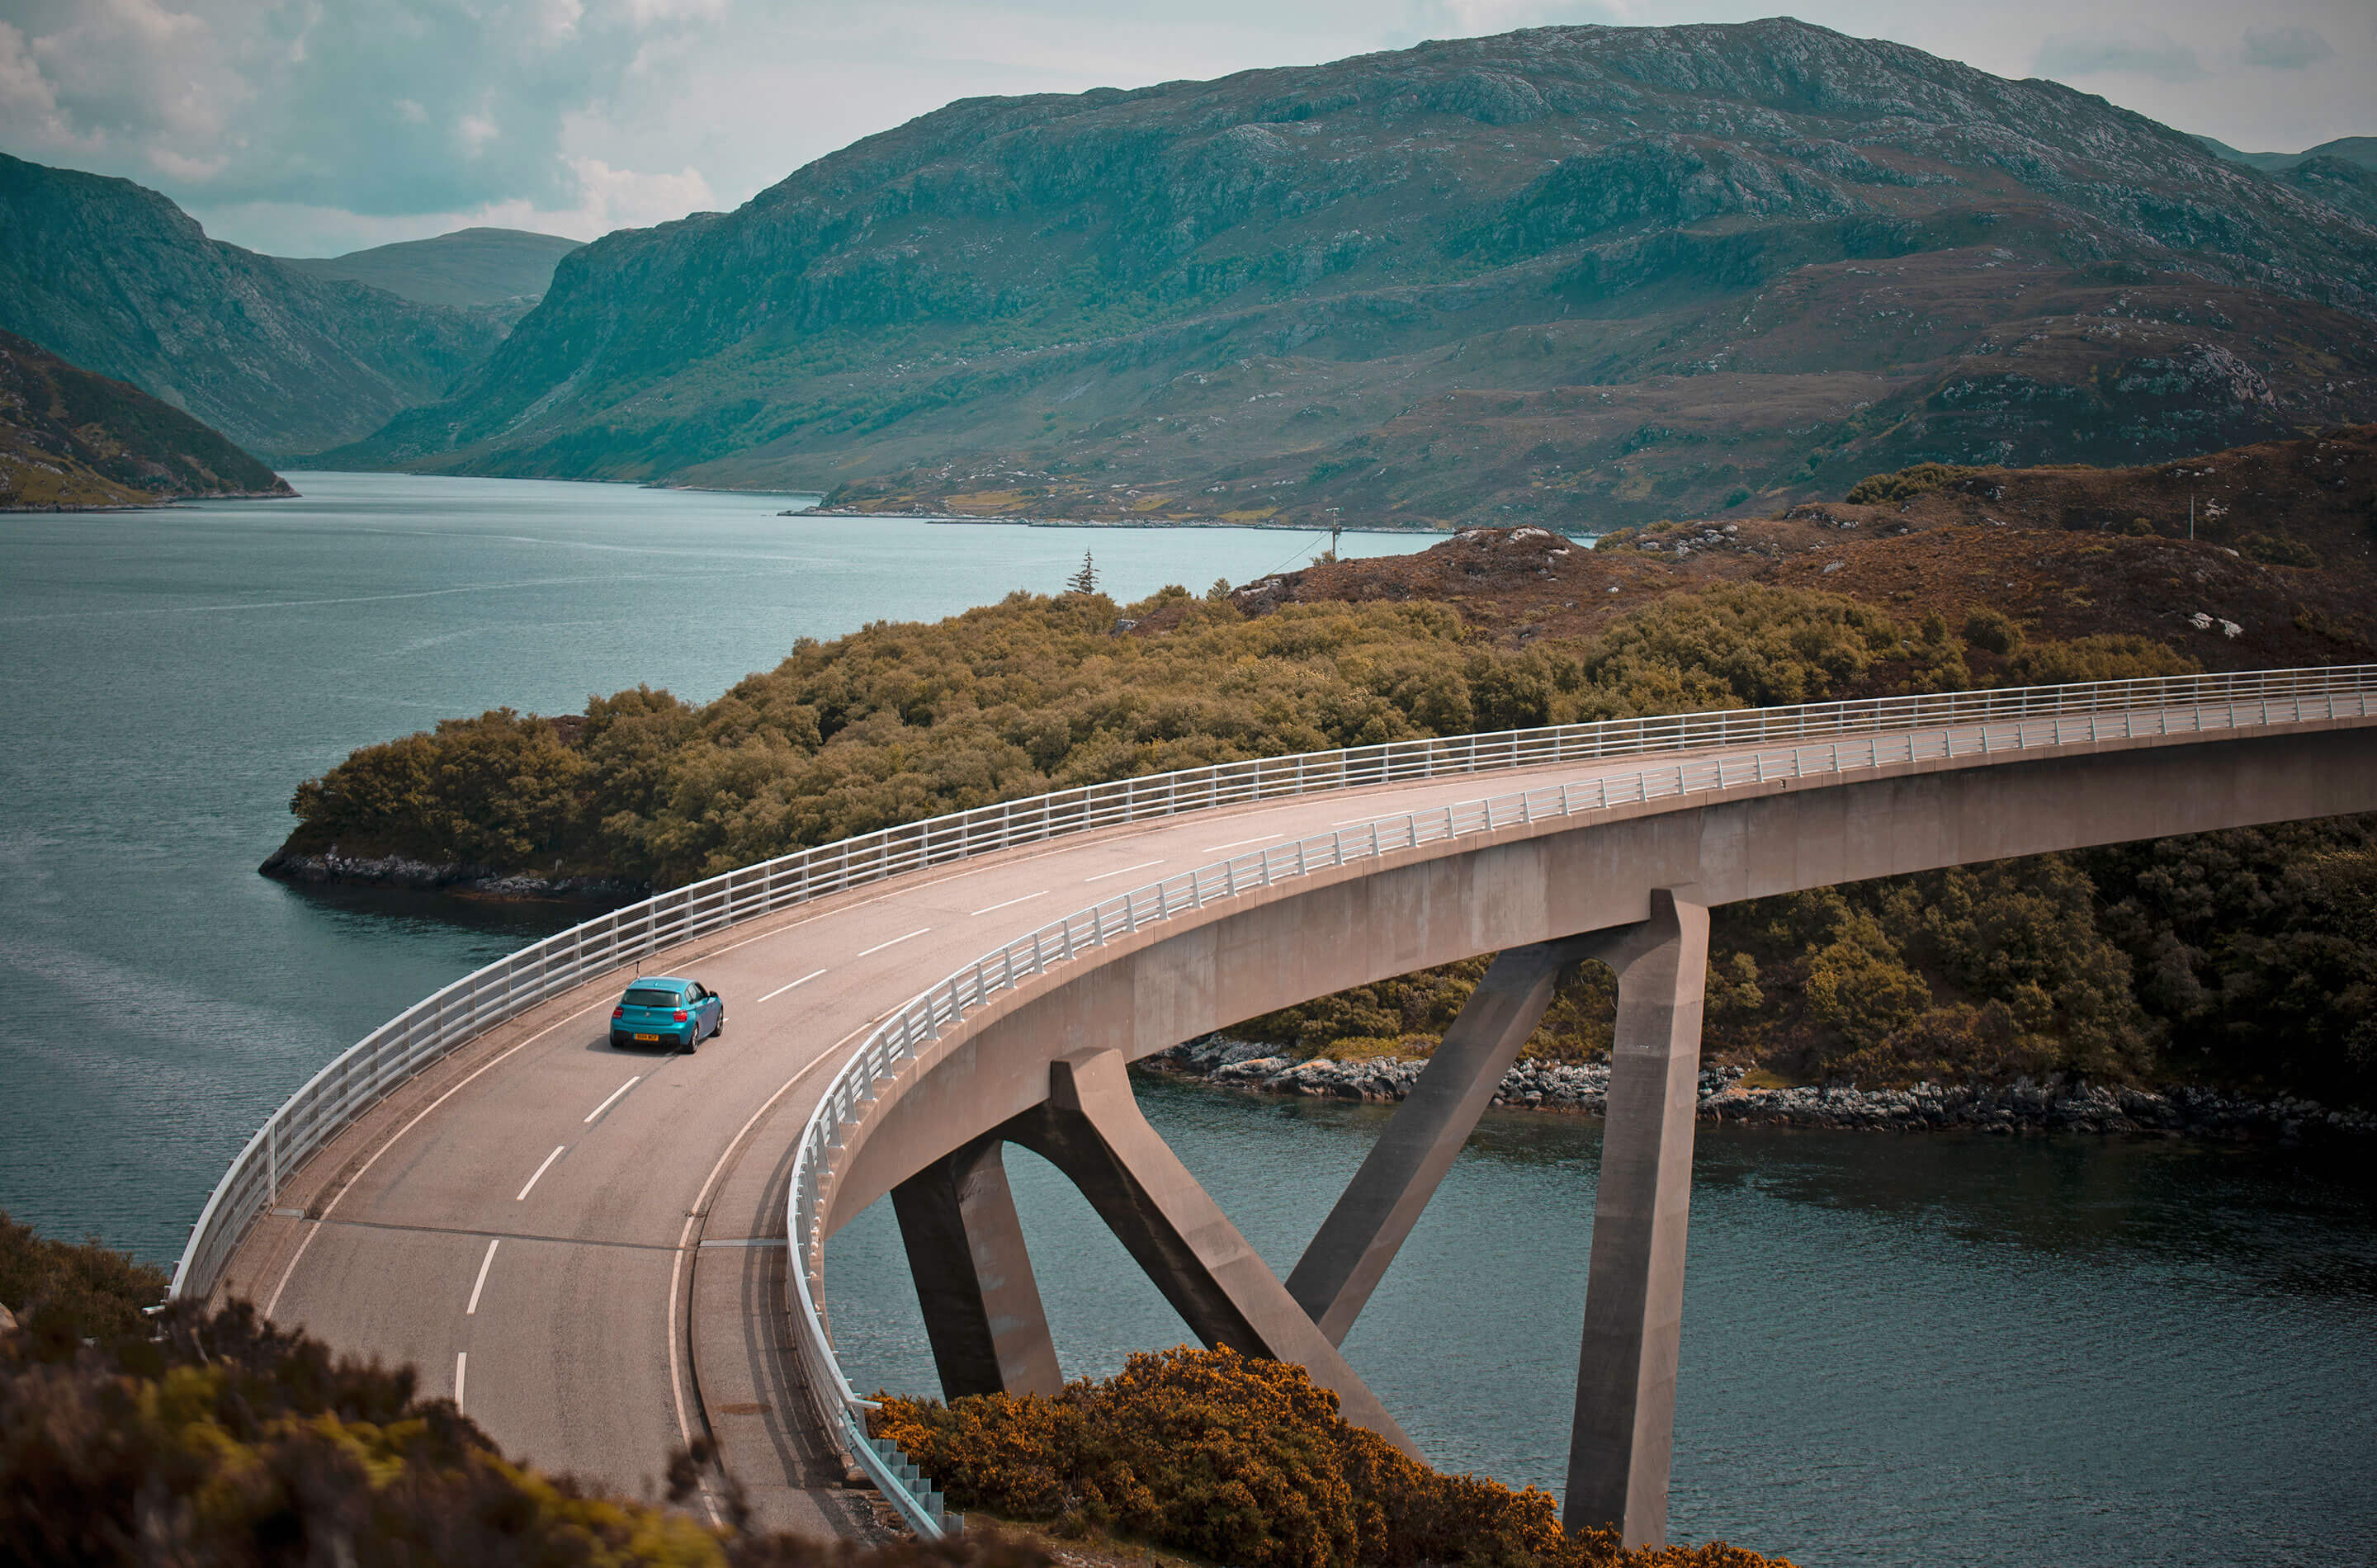 Scenic view of a curving bridge over calm waters with a solitary vehicle, framed by rugged mountains and coastline